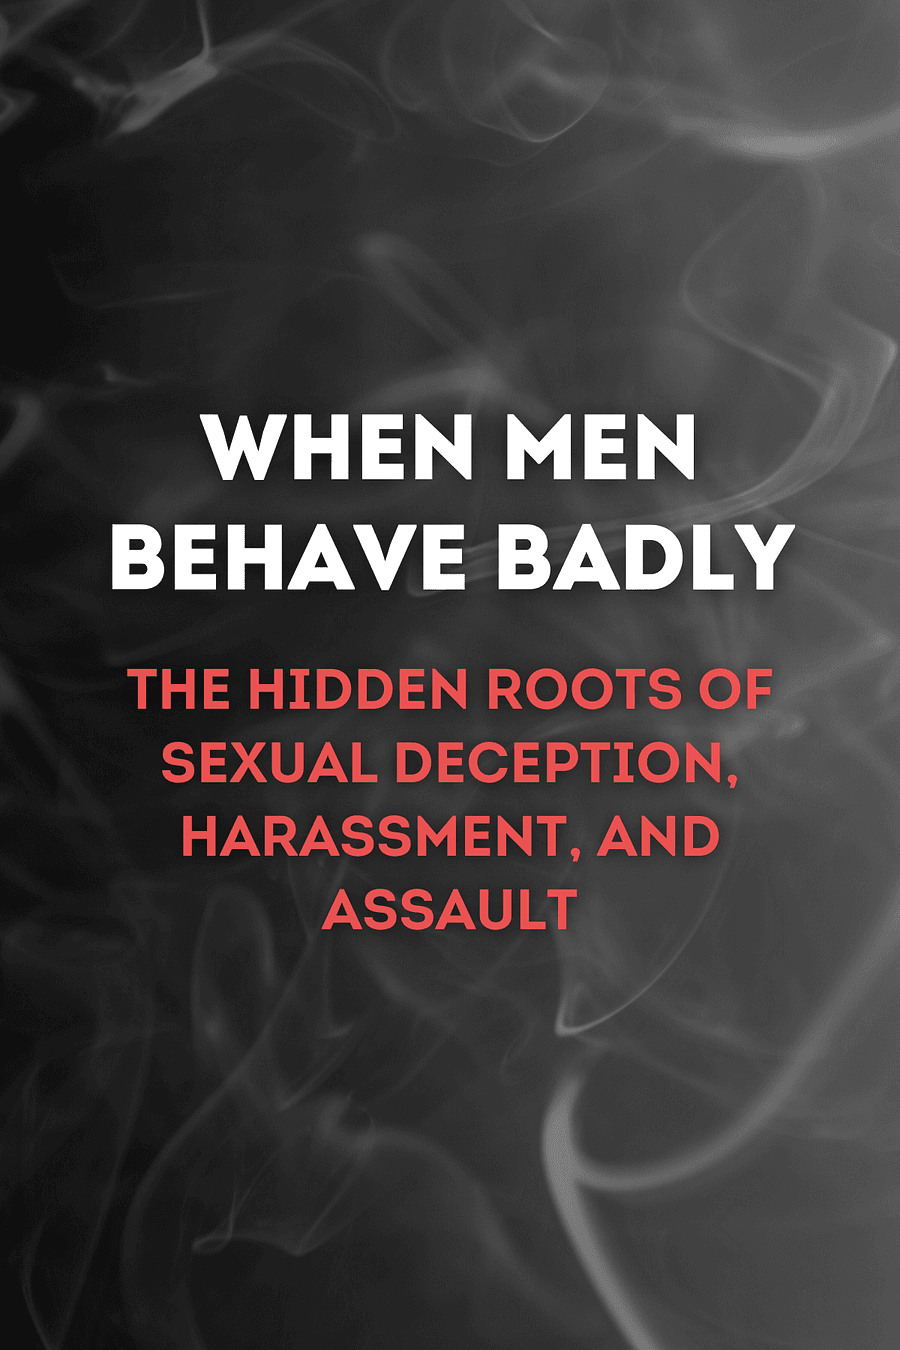 When Men Behave Badly by David M. Buss - Book Summary